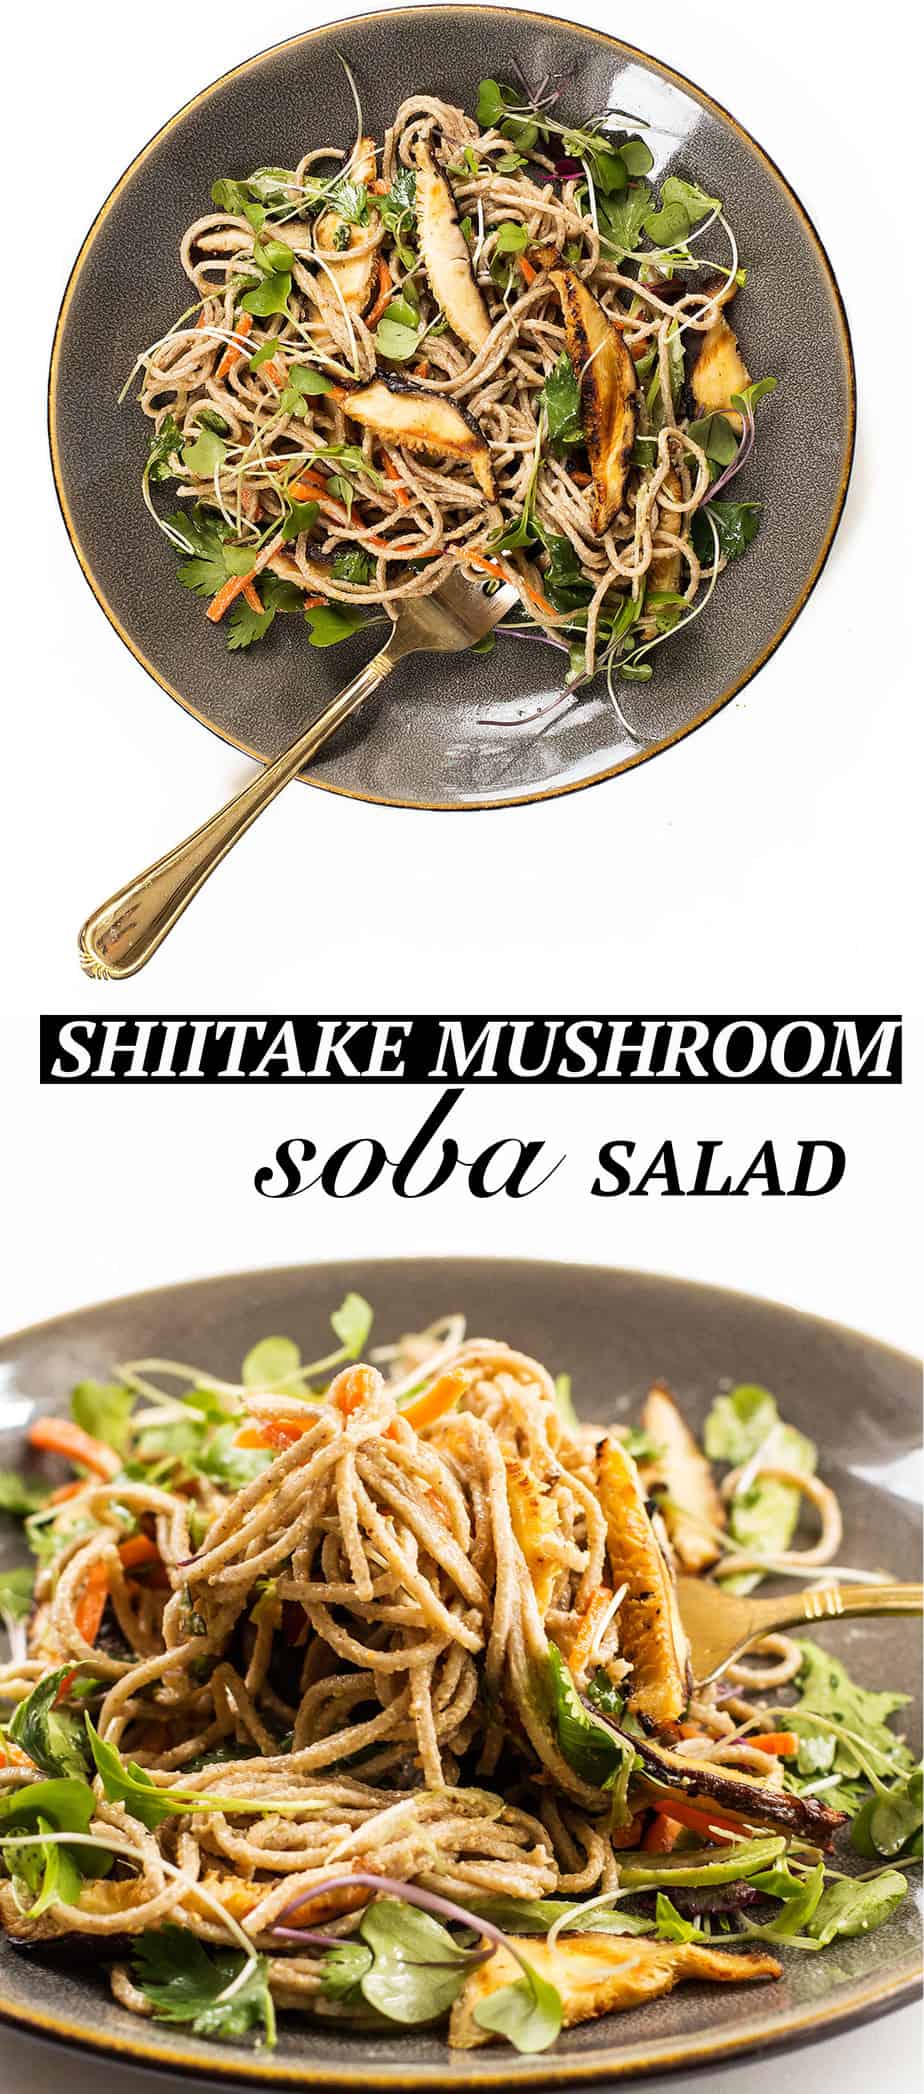 shiitake mushroom soba salad - This cold shiitake mushroom soba noodle salad is perfect for lunch or as a side-dish and is very filling. The peanut sauce dressing boosts the flavor to a new level. This recipe will be ready in less than 15 minutes.